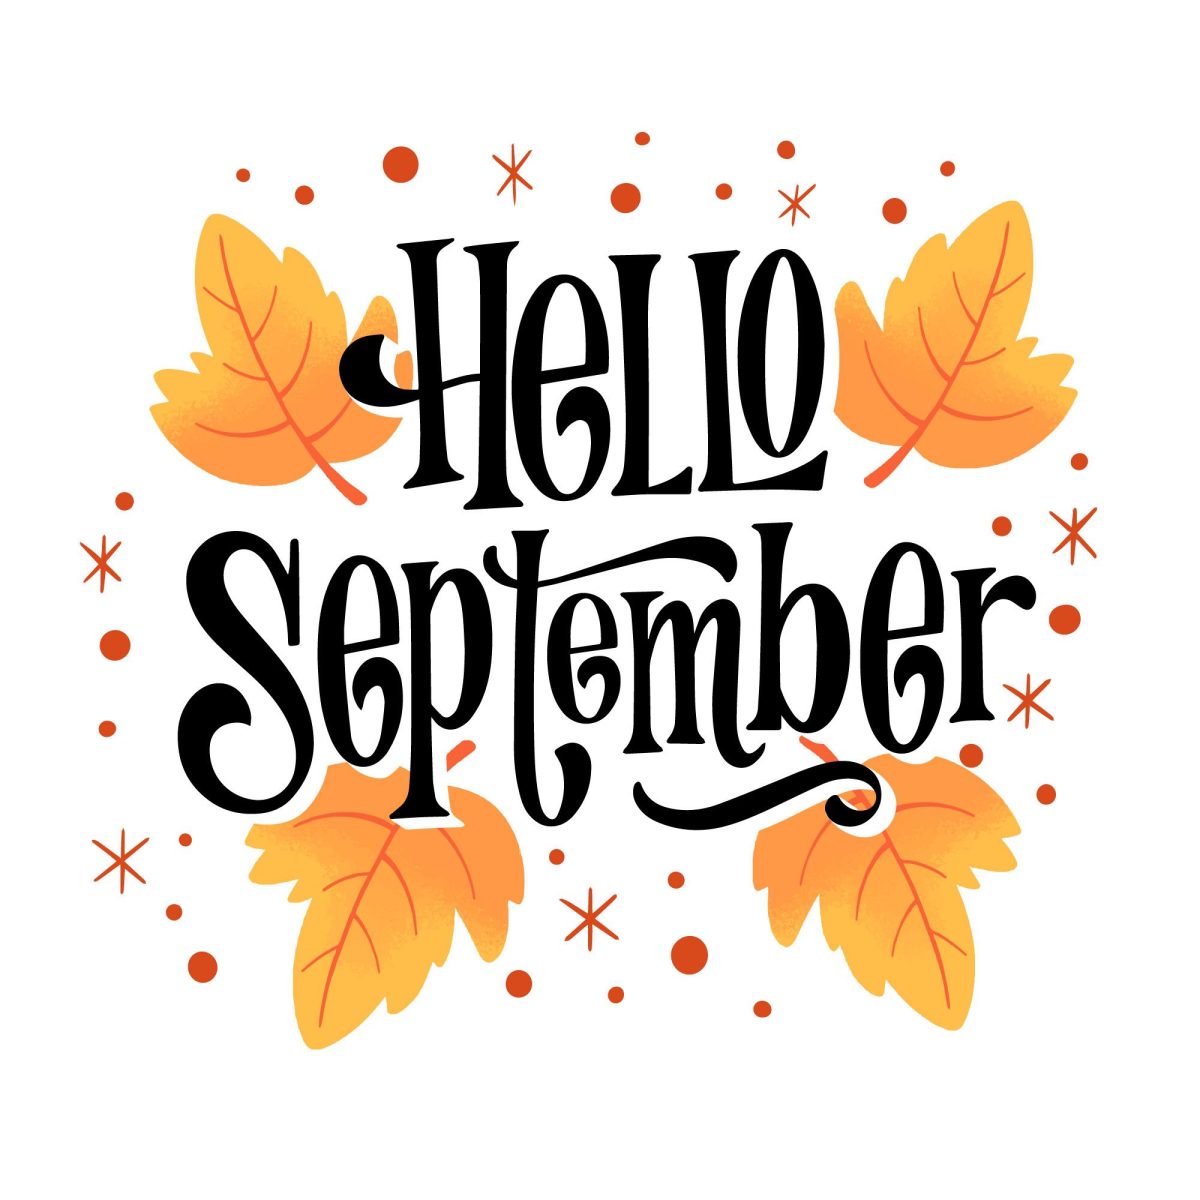 Whats up, September?